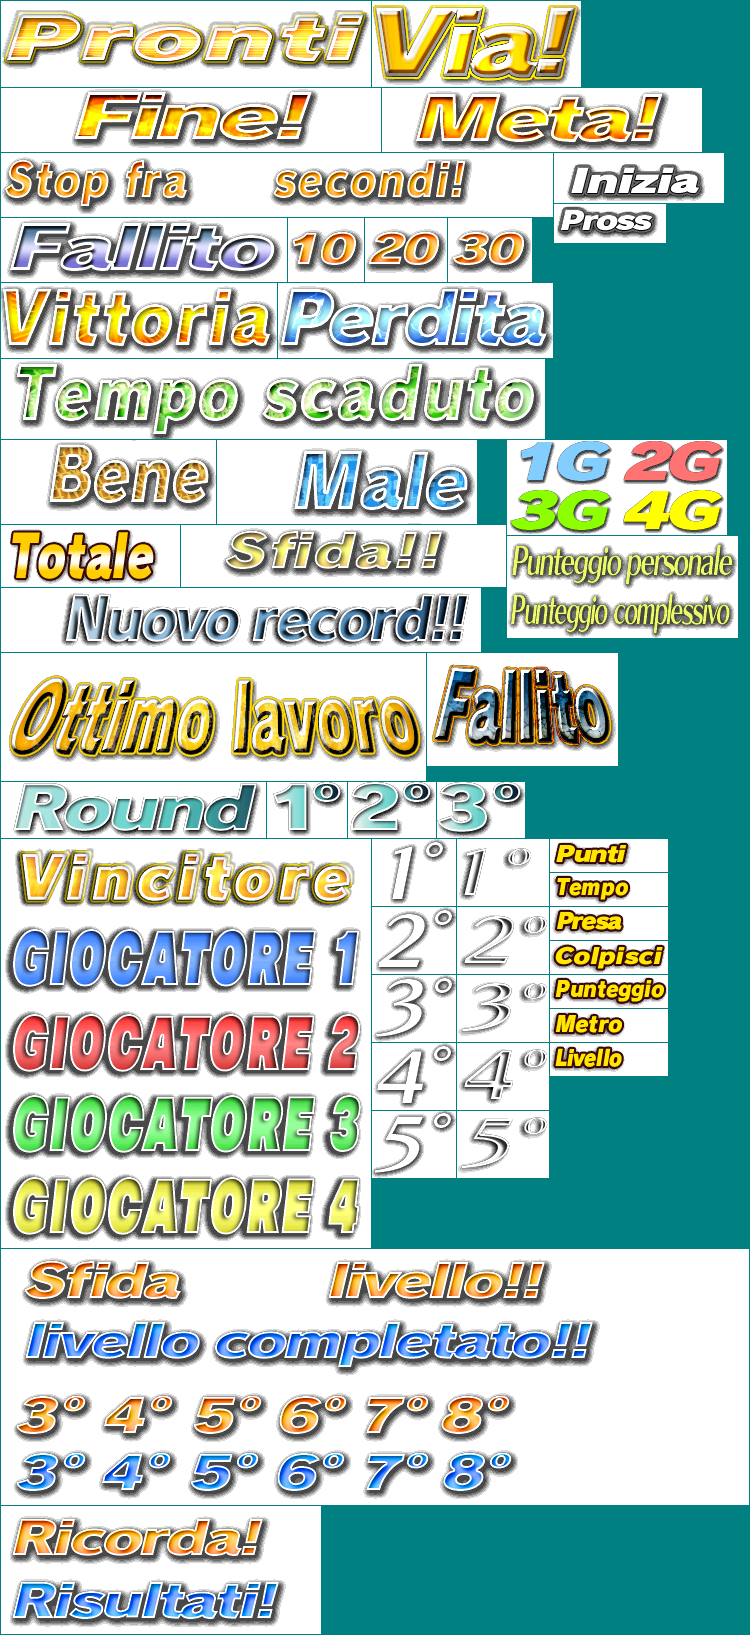 Family Party: 30 Great Games - Text (Italian)